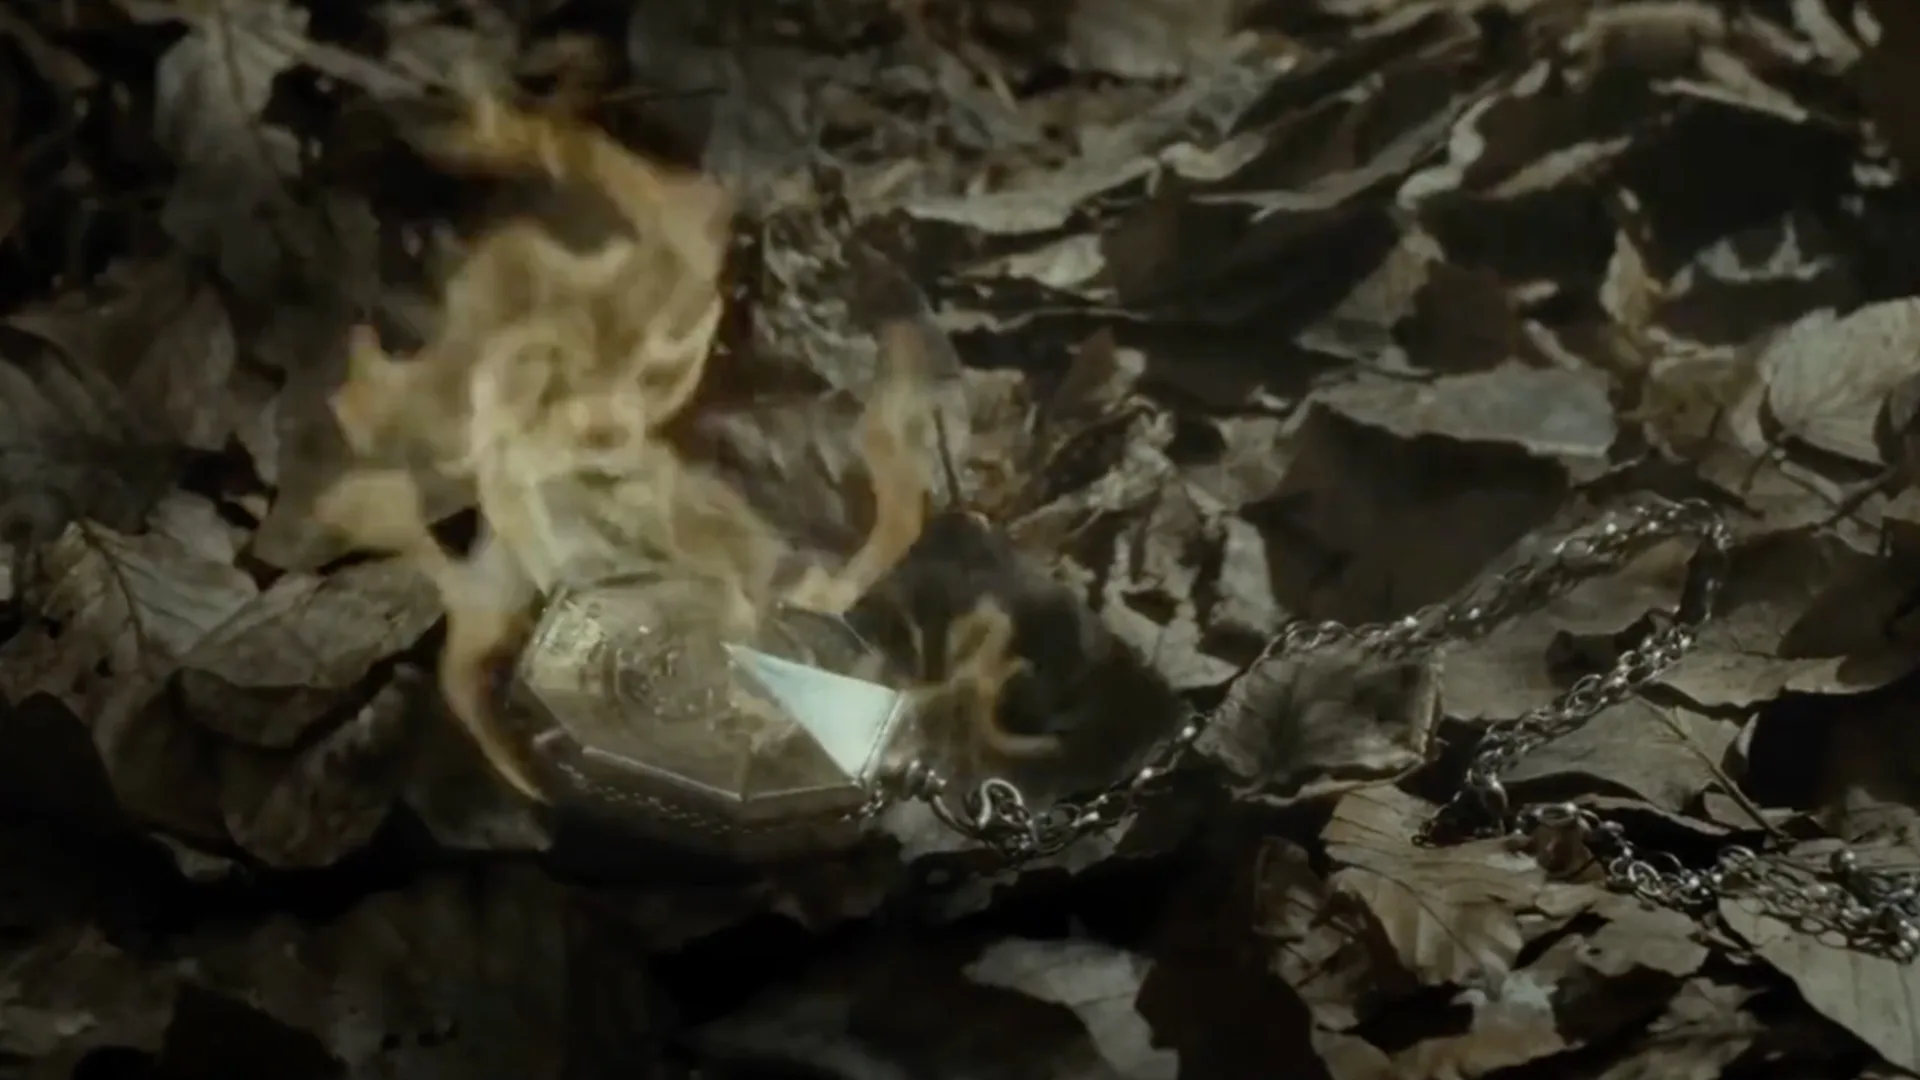 A locket on fire on a pile of leaves